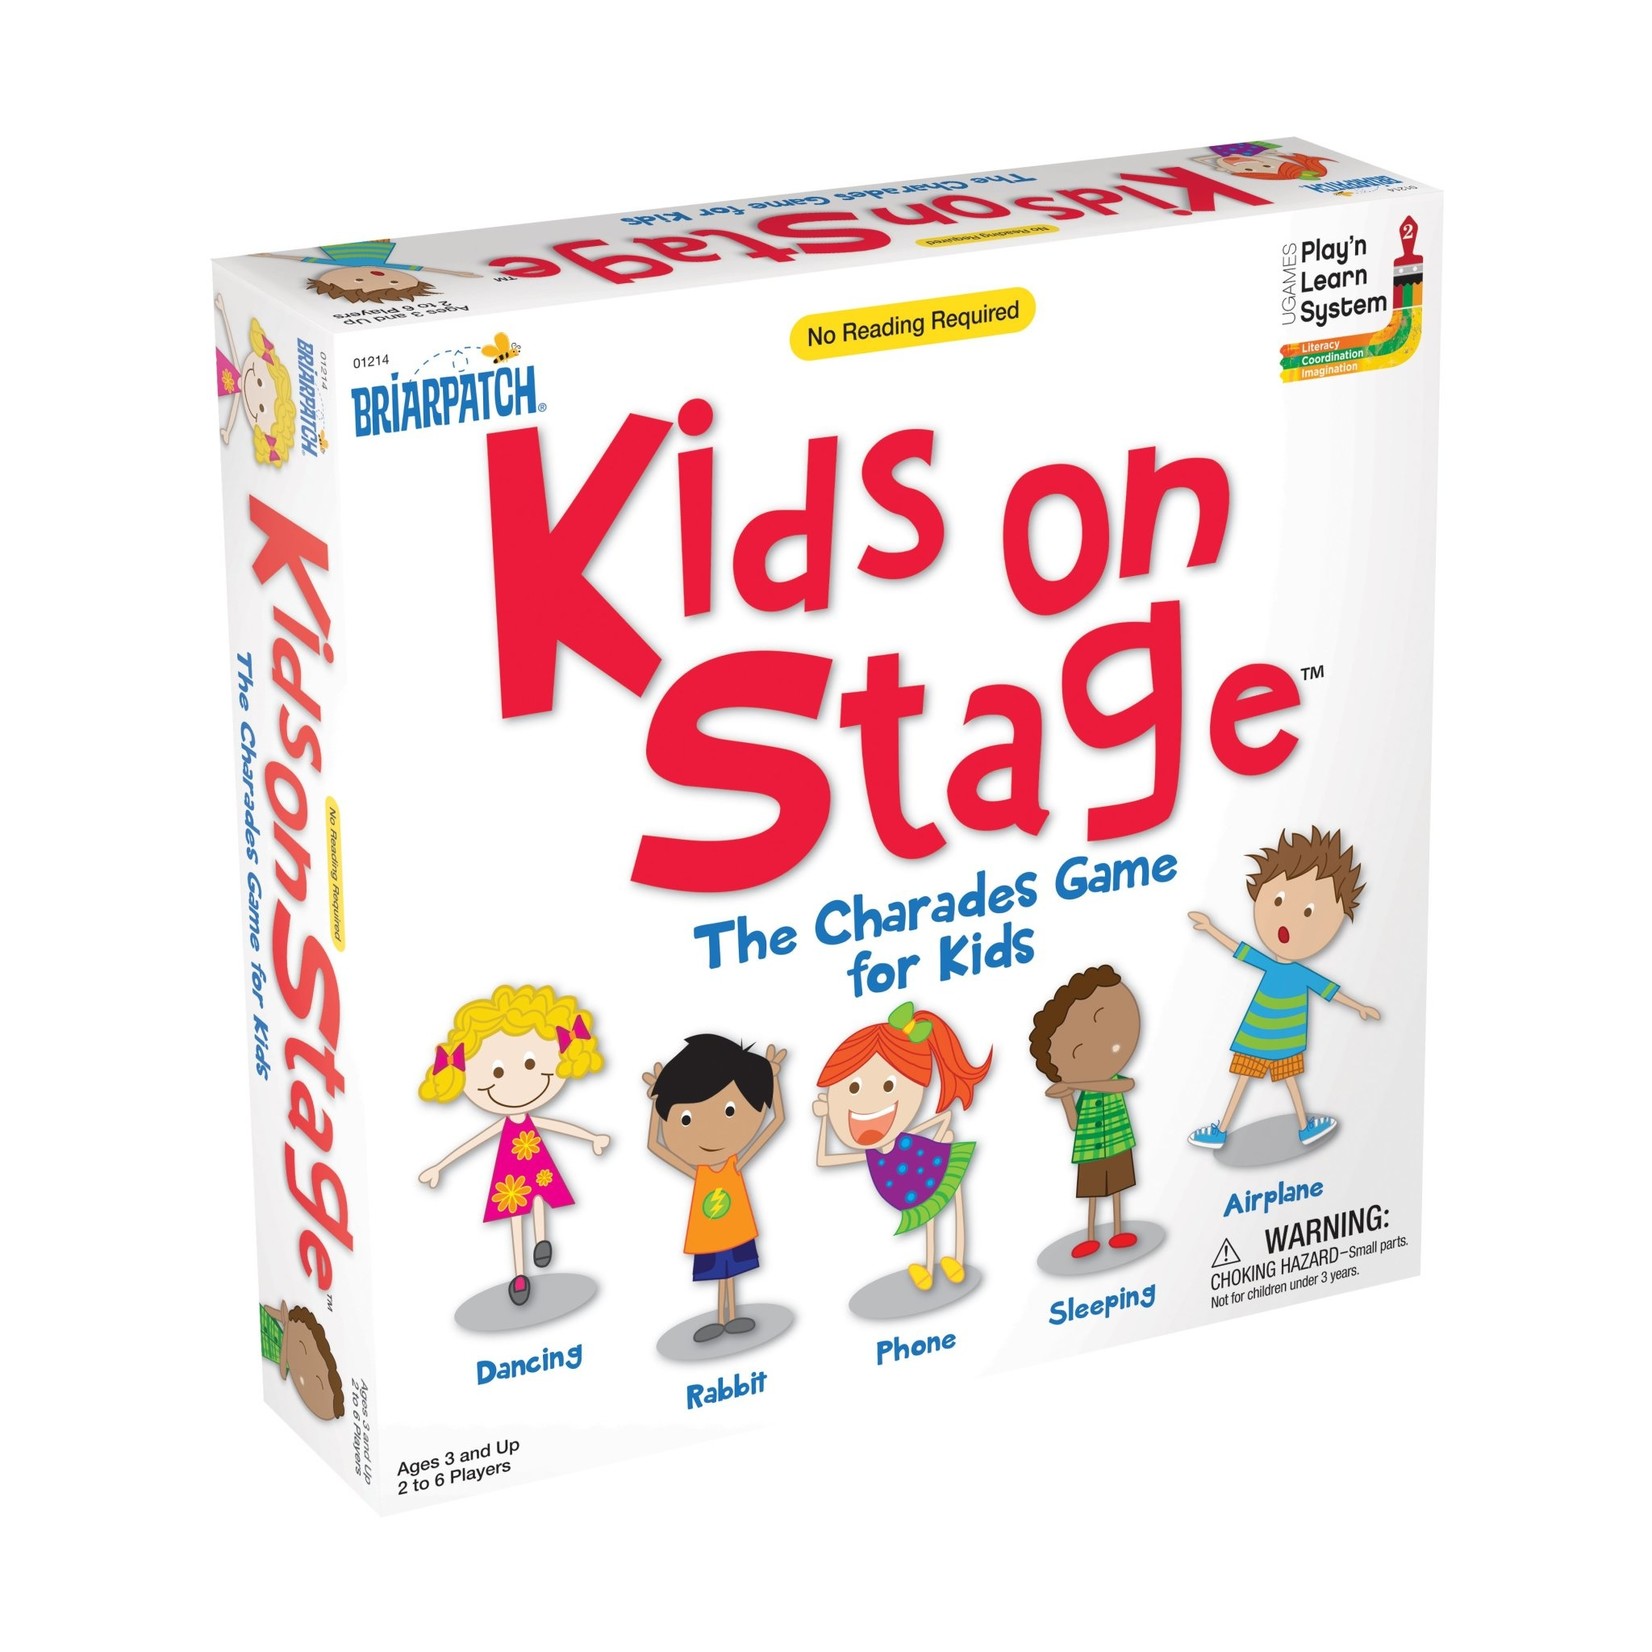 University Games Kid's On Stage (New Square Package)